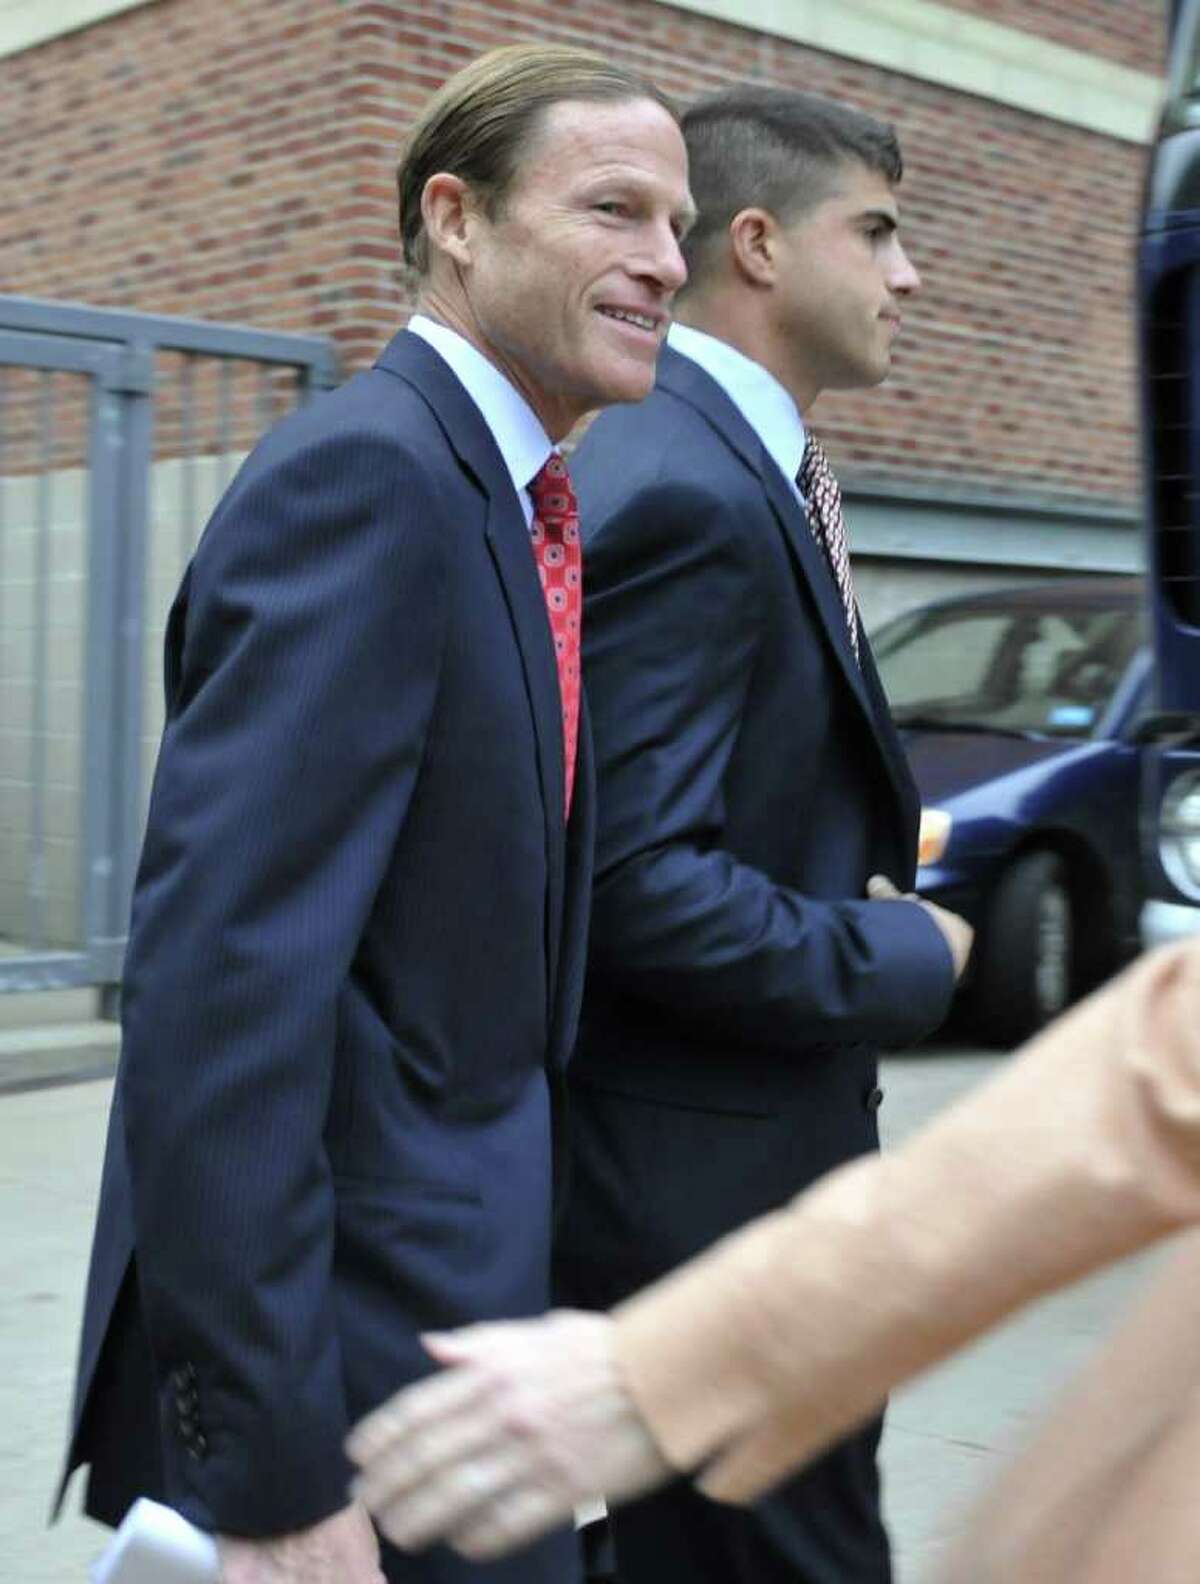 Democratic candidate for U.S. Senate Richard Blumenthal arrives at The Bushnell theater prior to a debate with Republican candidate Linda McMahon in Hartford, Conn., on Monday, Oct. 4, 2010. (AP Photo/Jessica Hill)